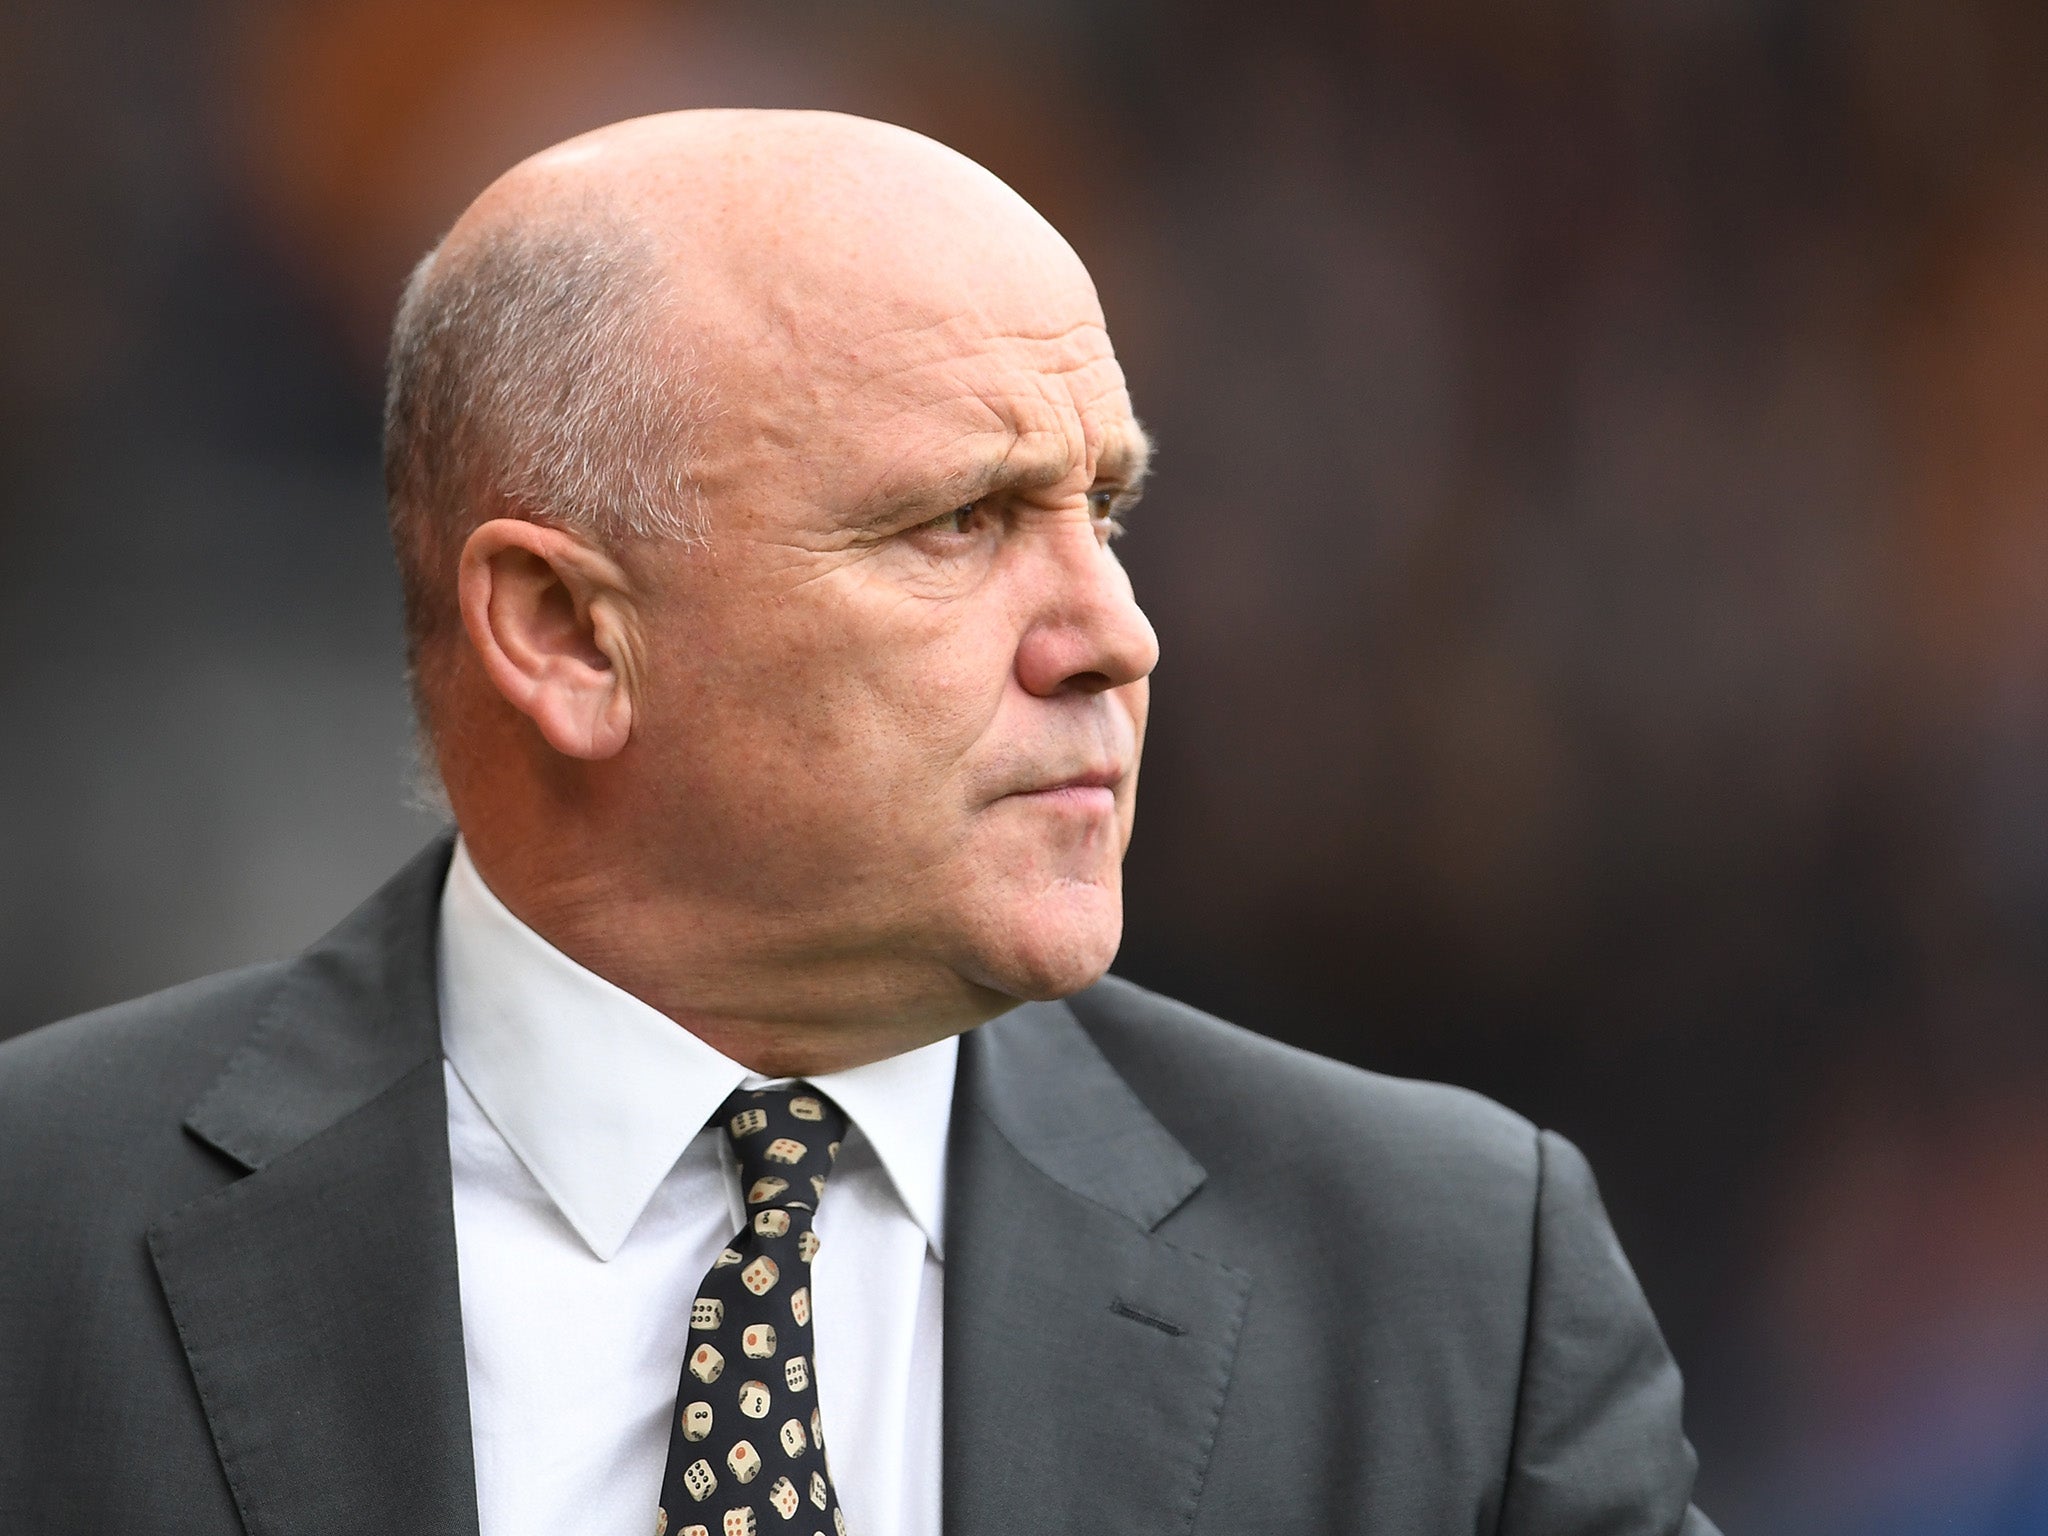 It is Phelan's first permanent managerial role